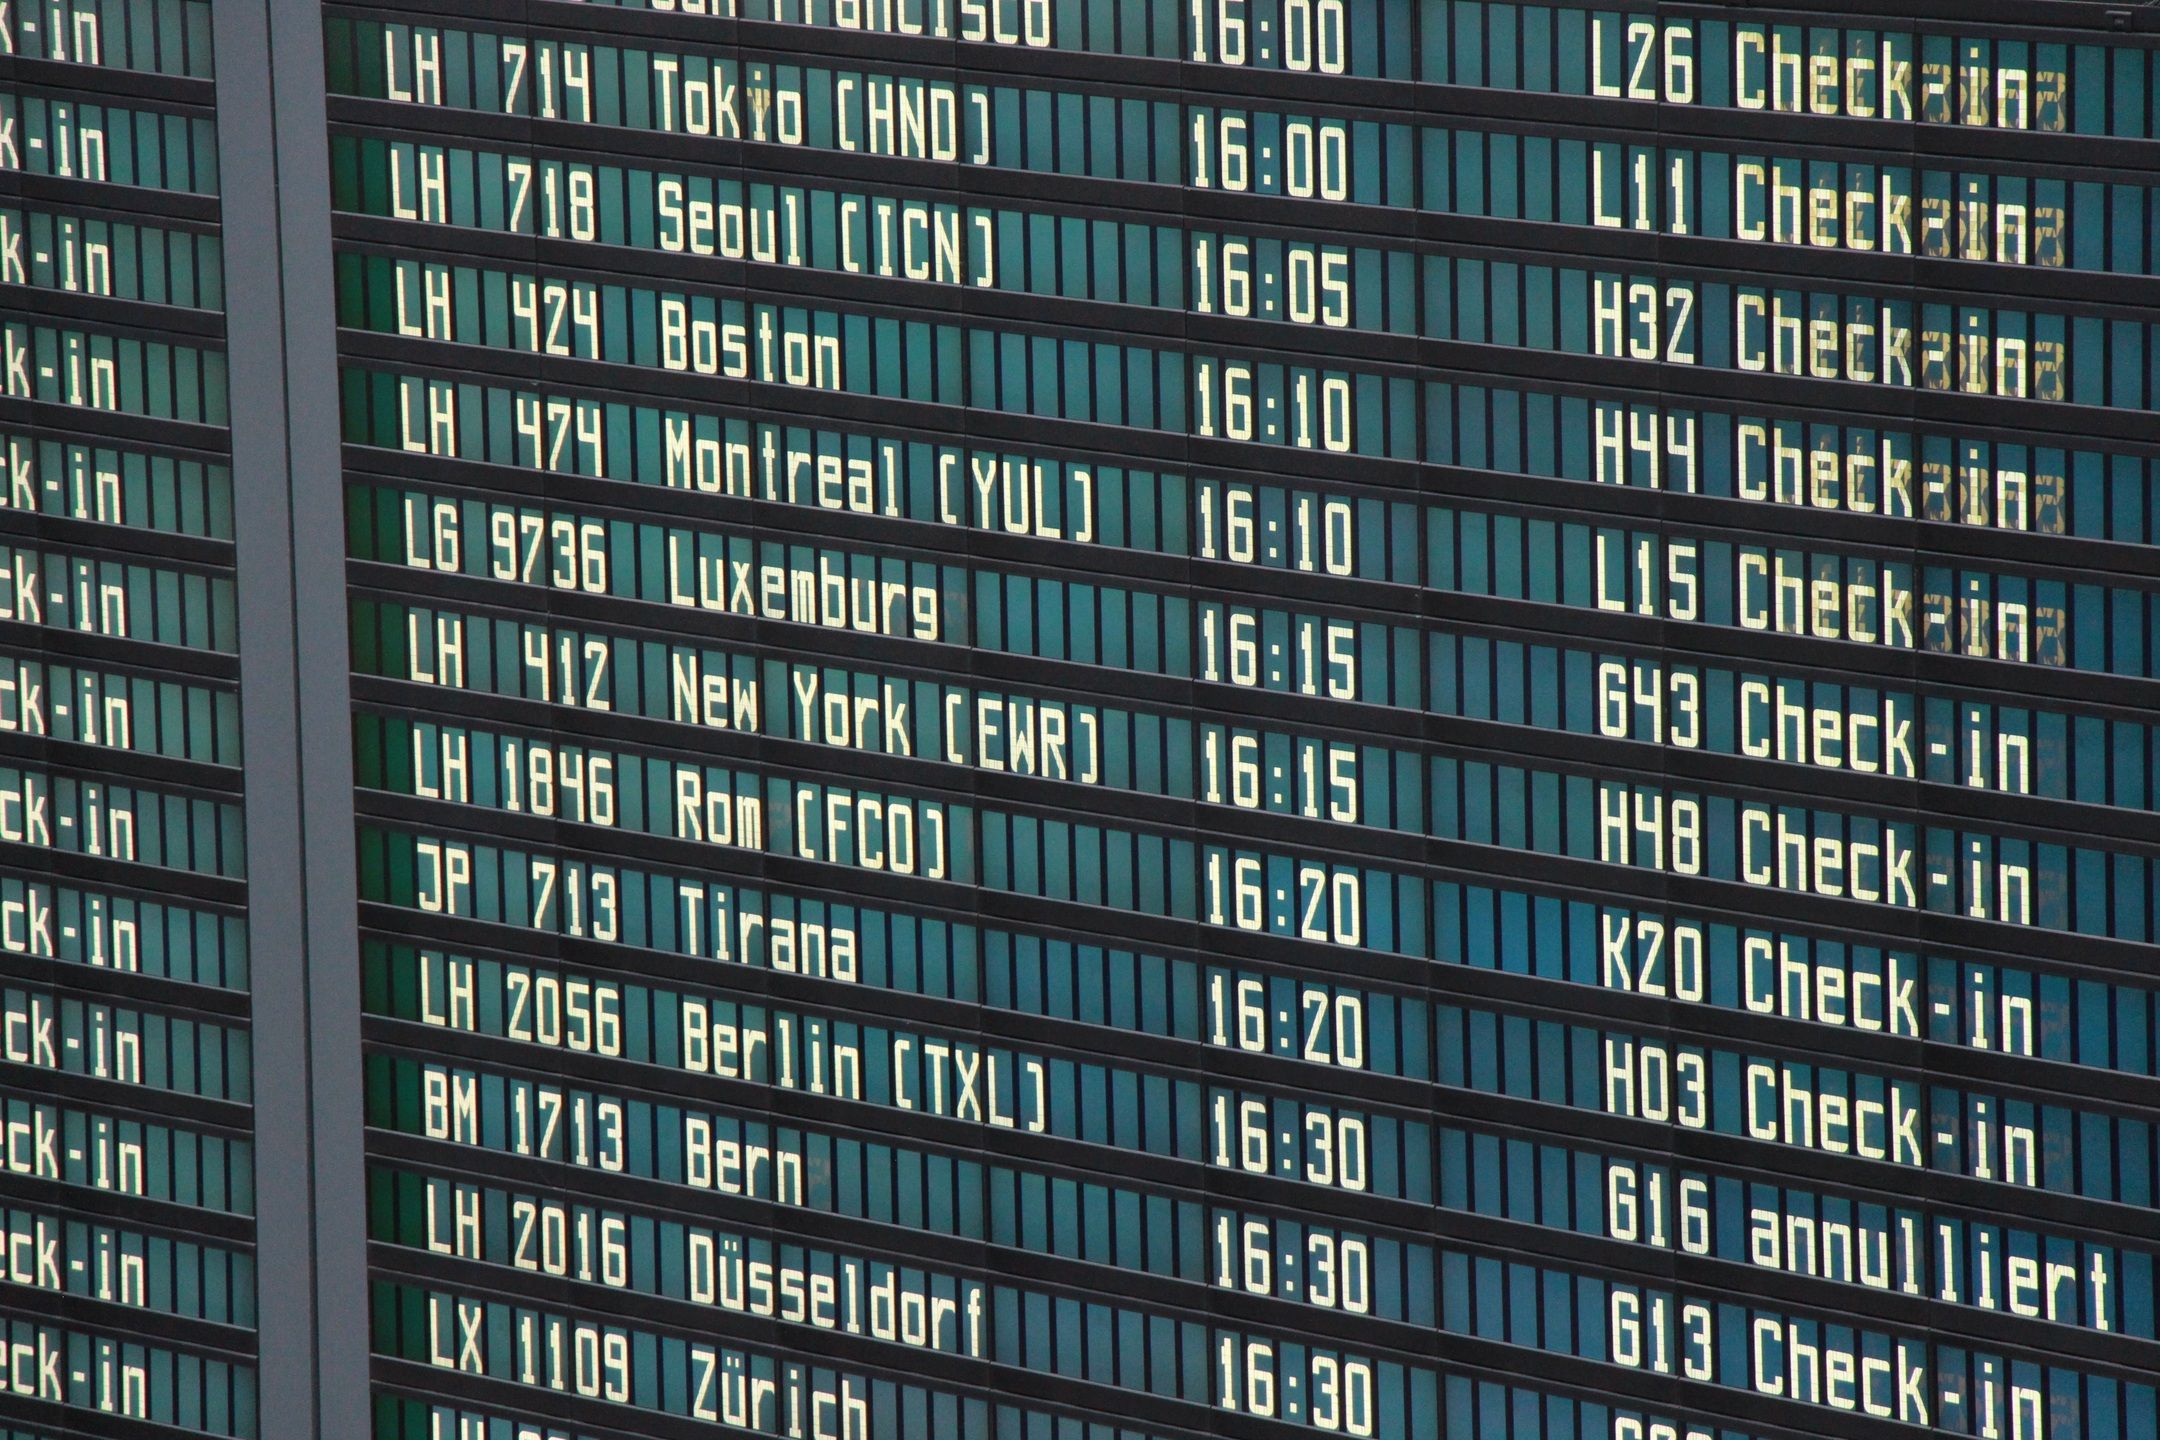 A departure board in Germany featuring flights to major cities all over the world..